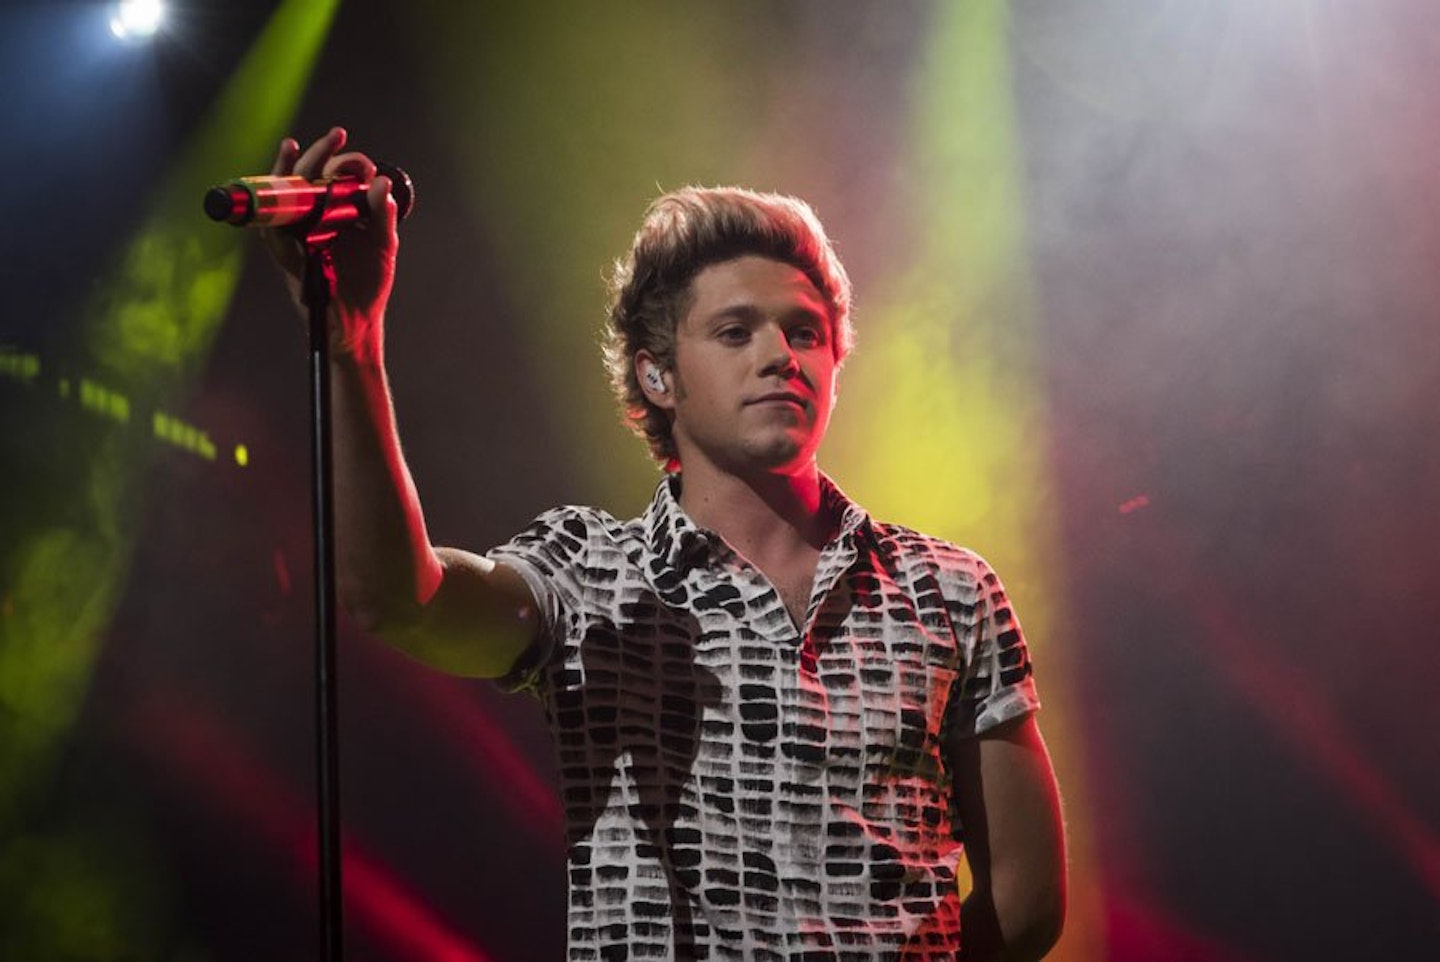 Niall Horan, singer (One Direction)